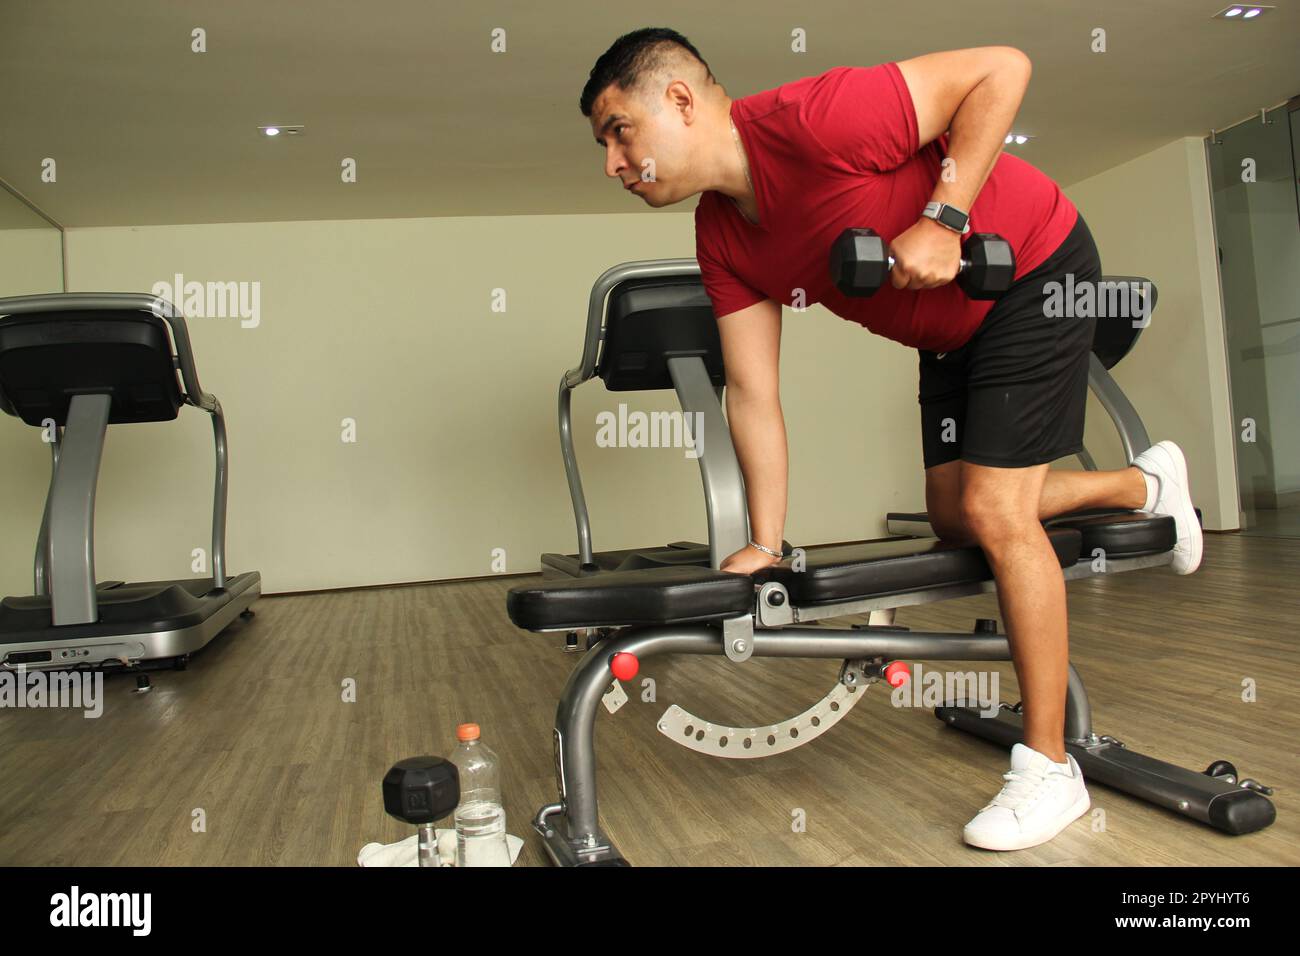 Dark-haired latino adult man exercises in a gym, muscle strength work for physiotherapy rehabilitation on arm with dumbbells Stock Photo